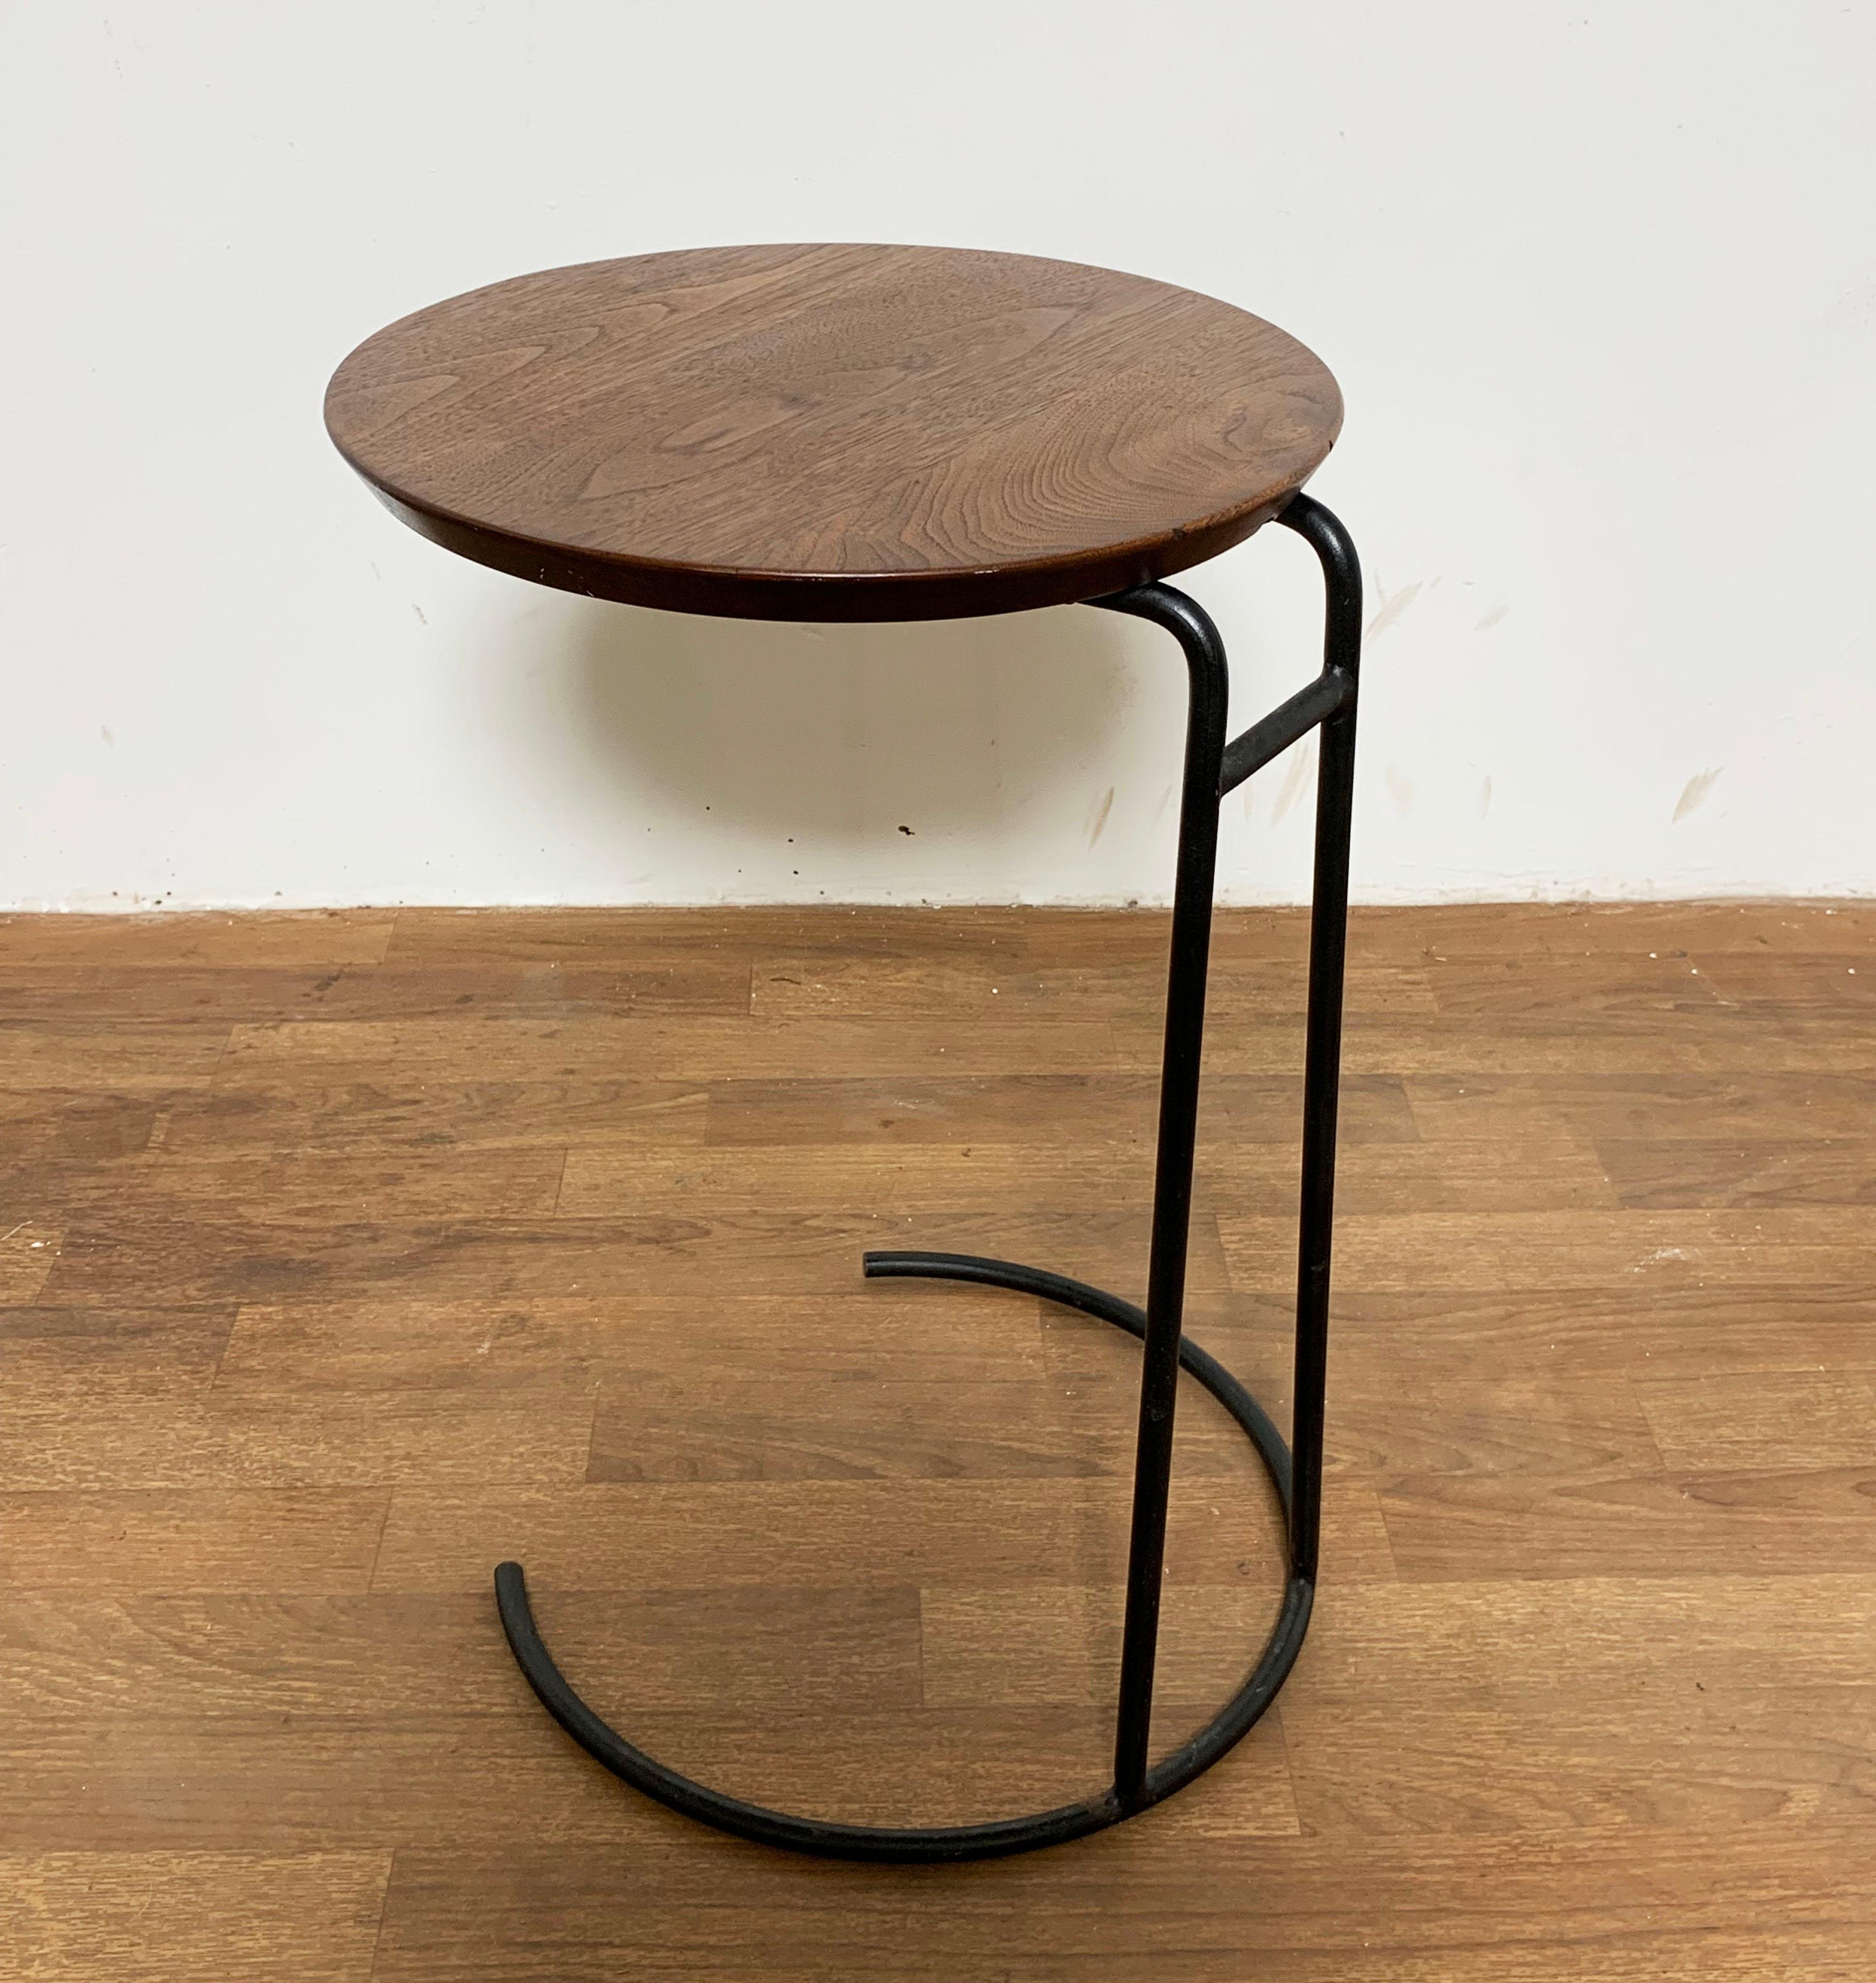 American Signed Jens Risom T710 Side Table in Walnut and Steel circa 1950s